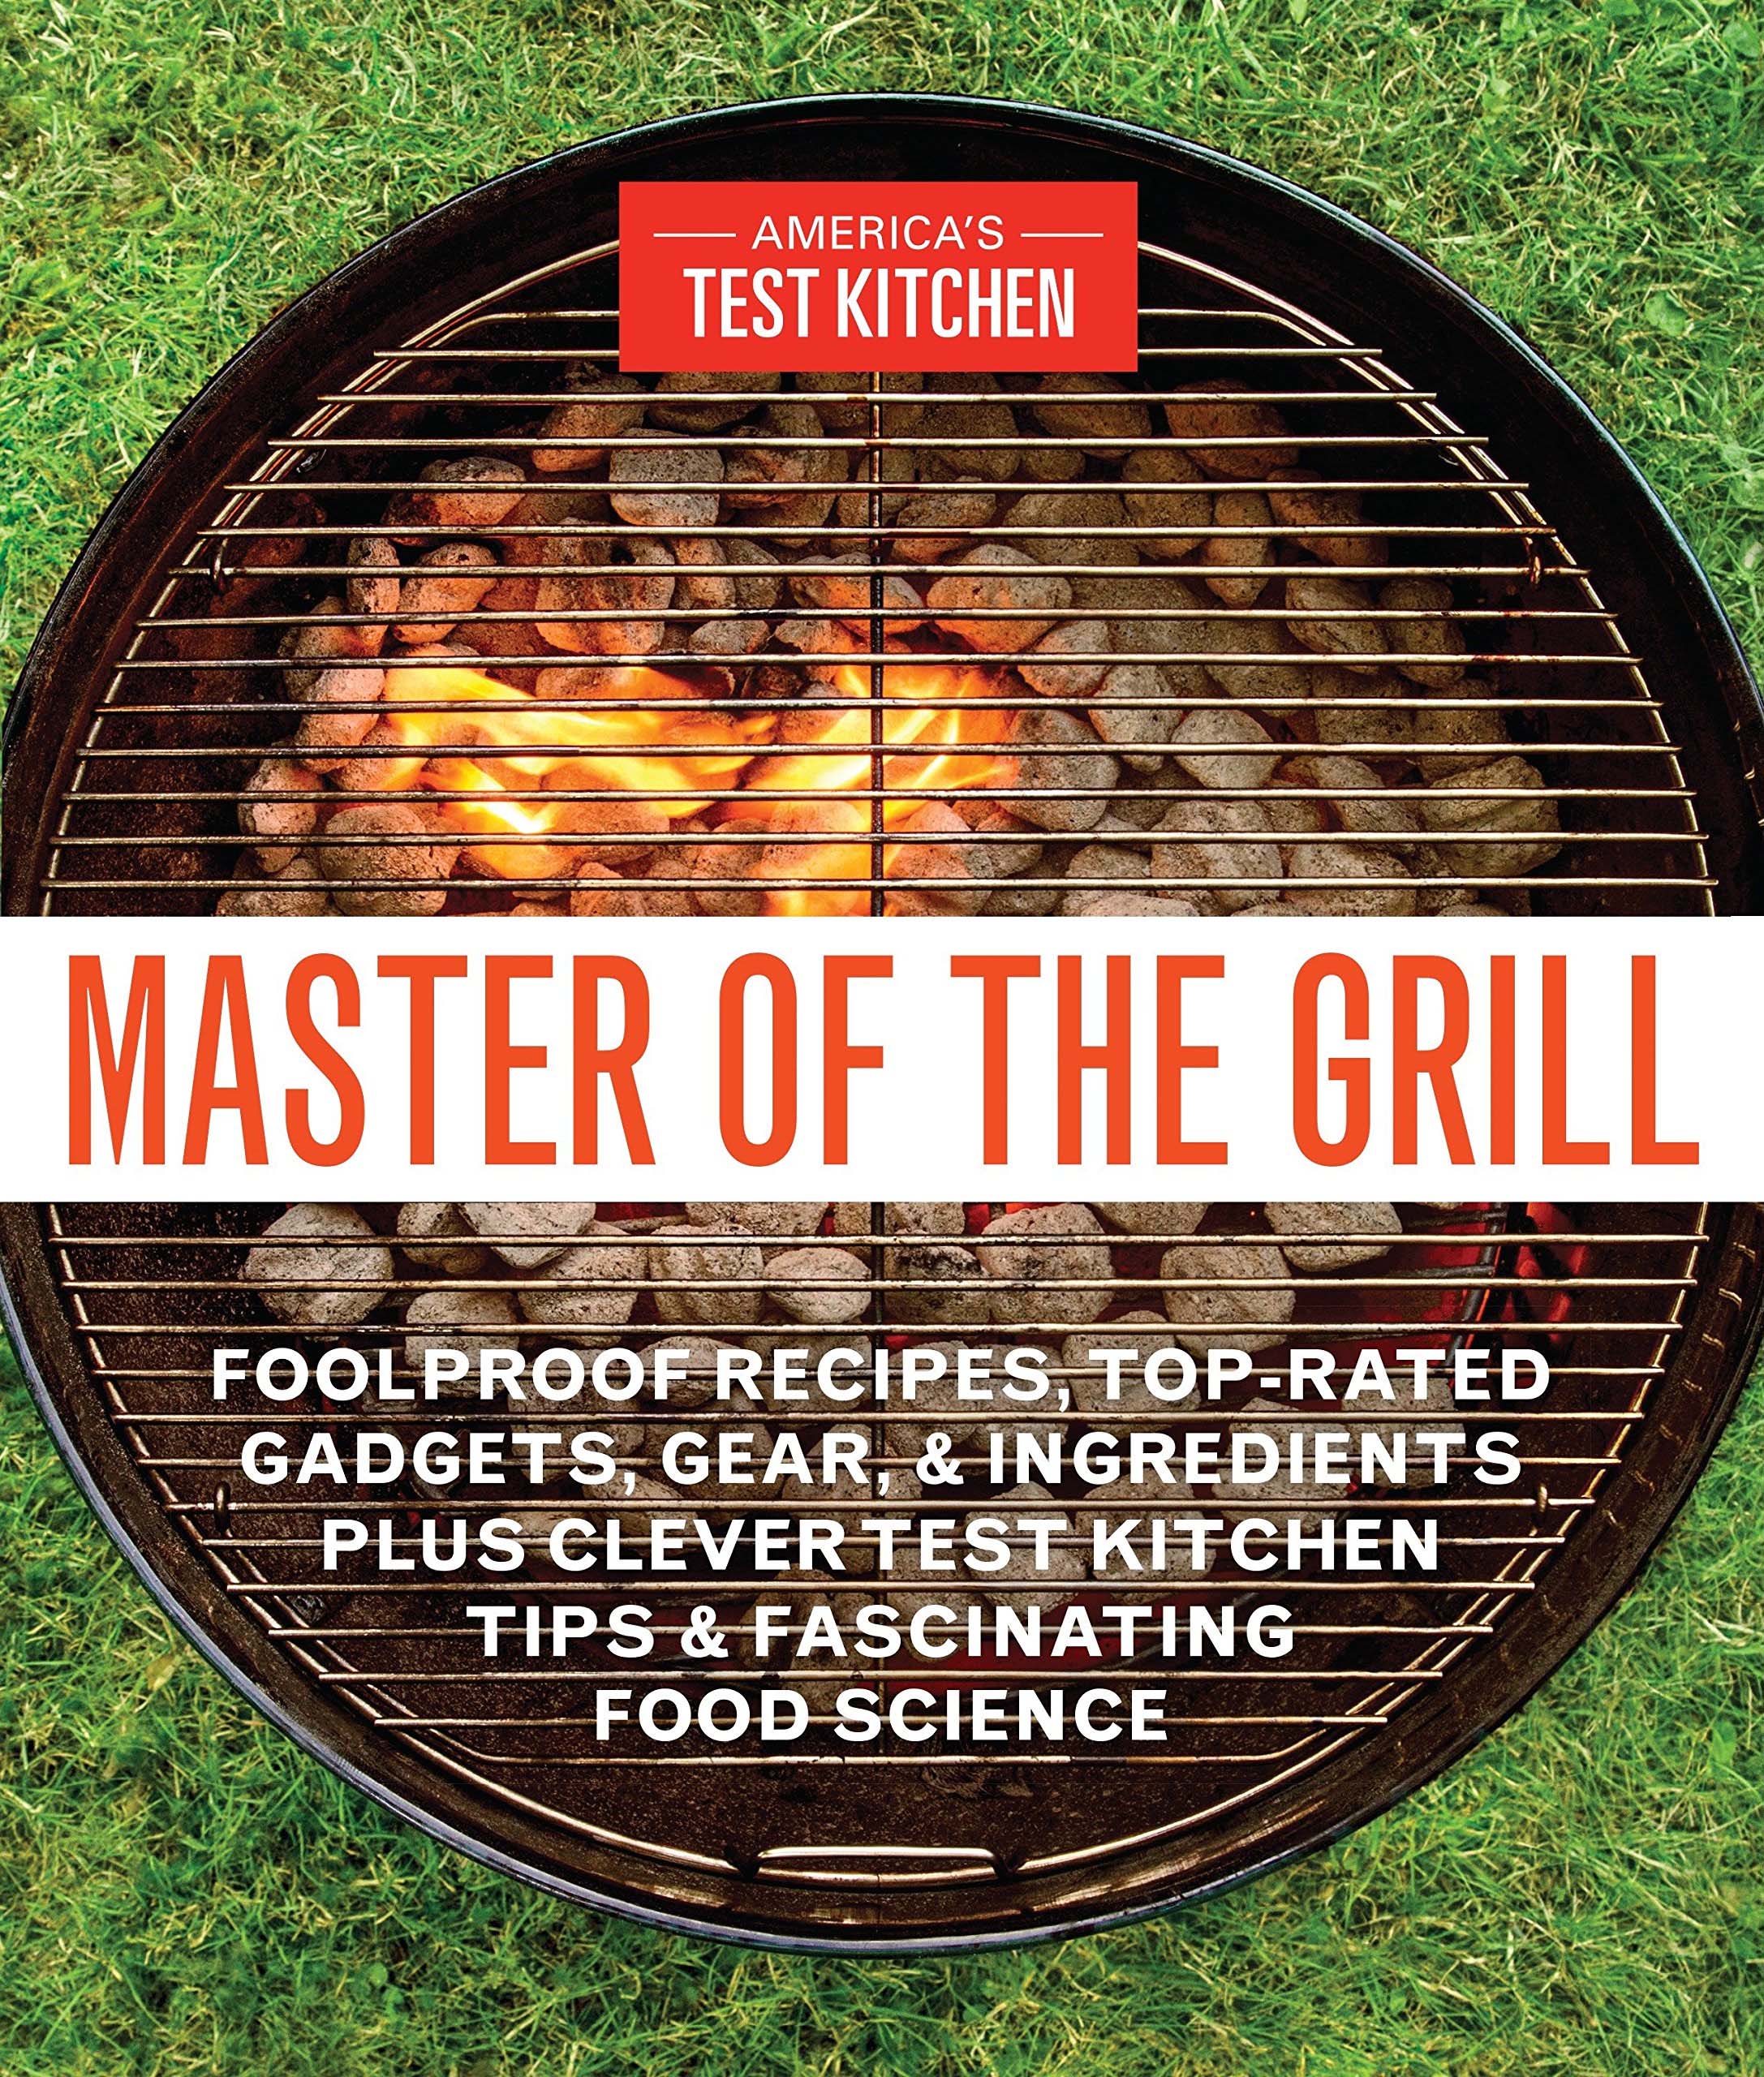 master of the grill america's test kitchen cover - America'S Test Kitchen Master Of The Grill Foolproof Recipes, TopRated Gadgets, Gear & Ingredients Plus Clever Test Kitchen Tips & Fascinating Food Science